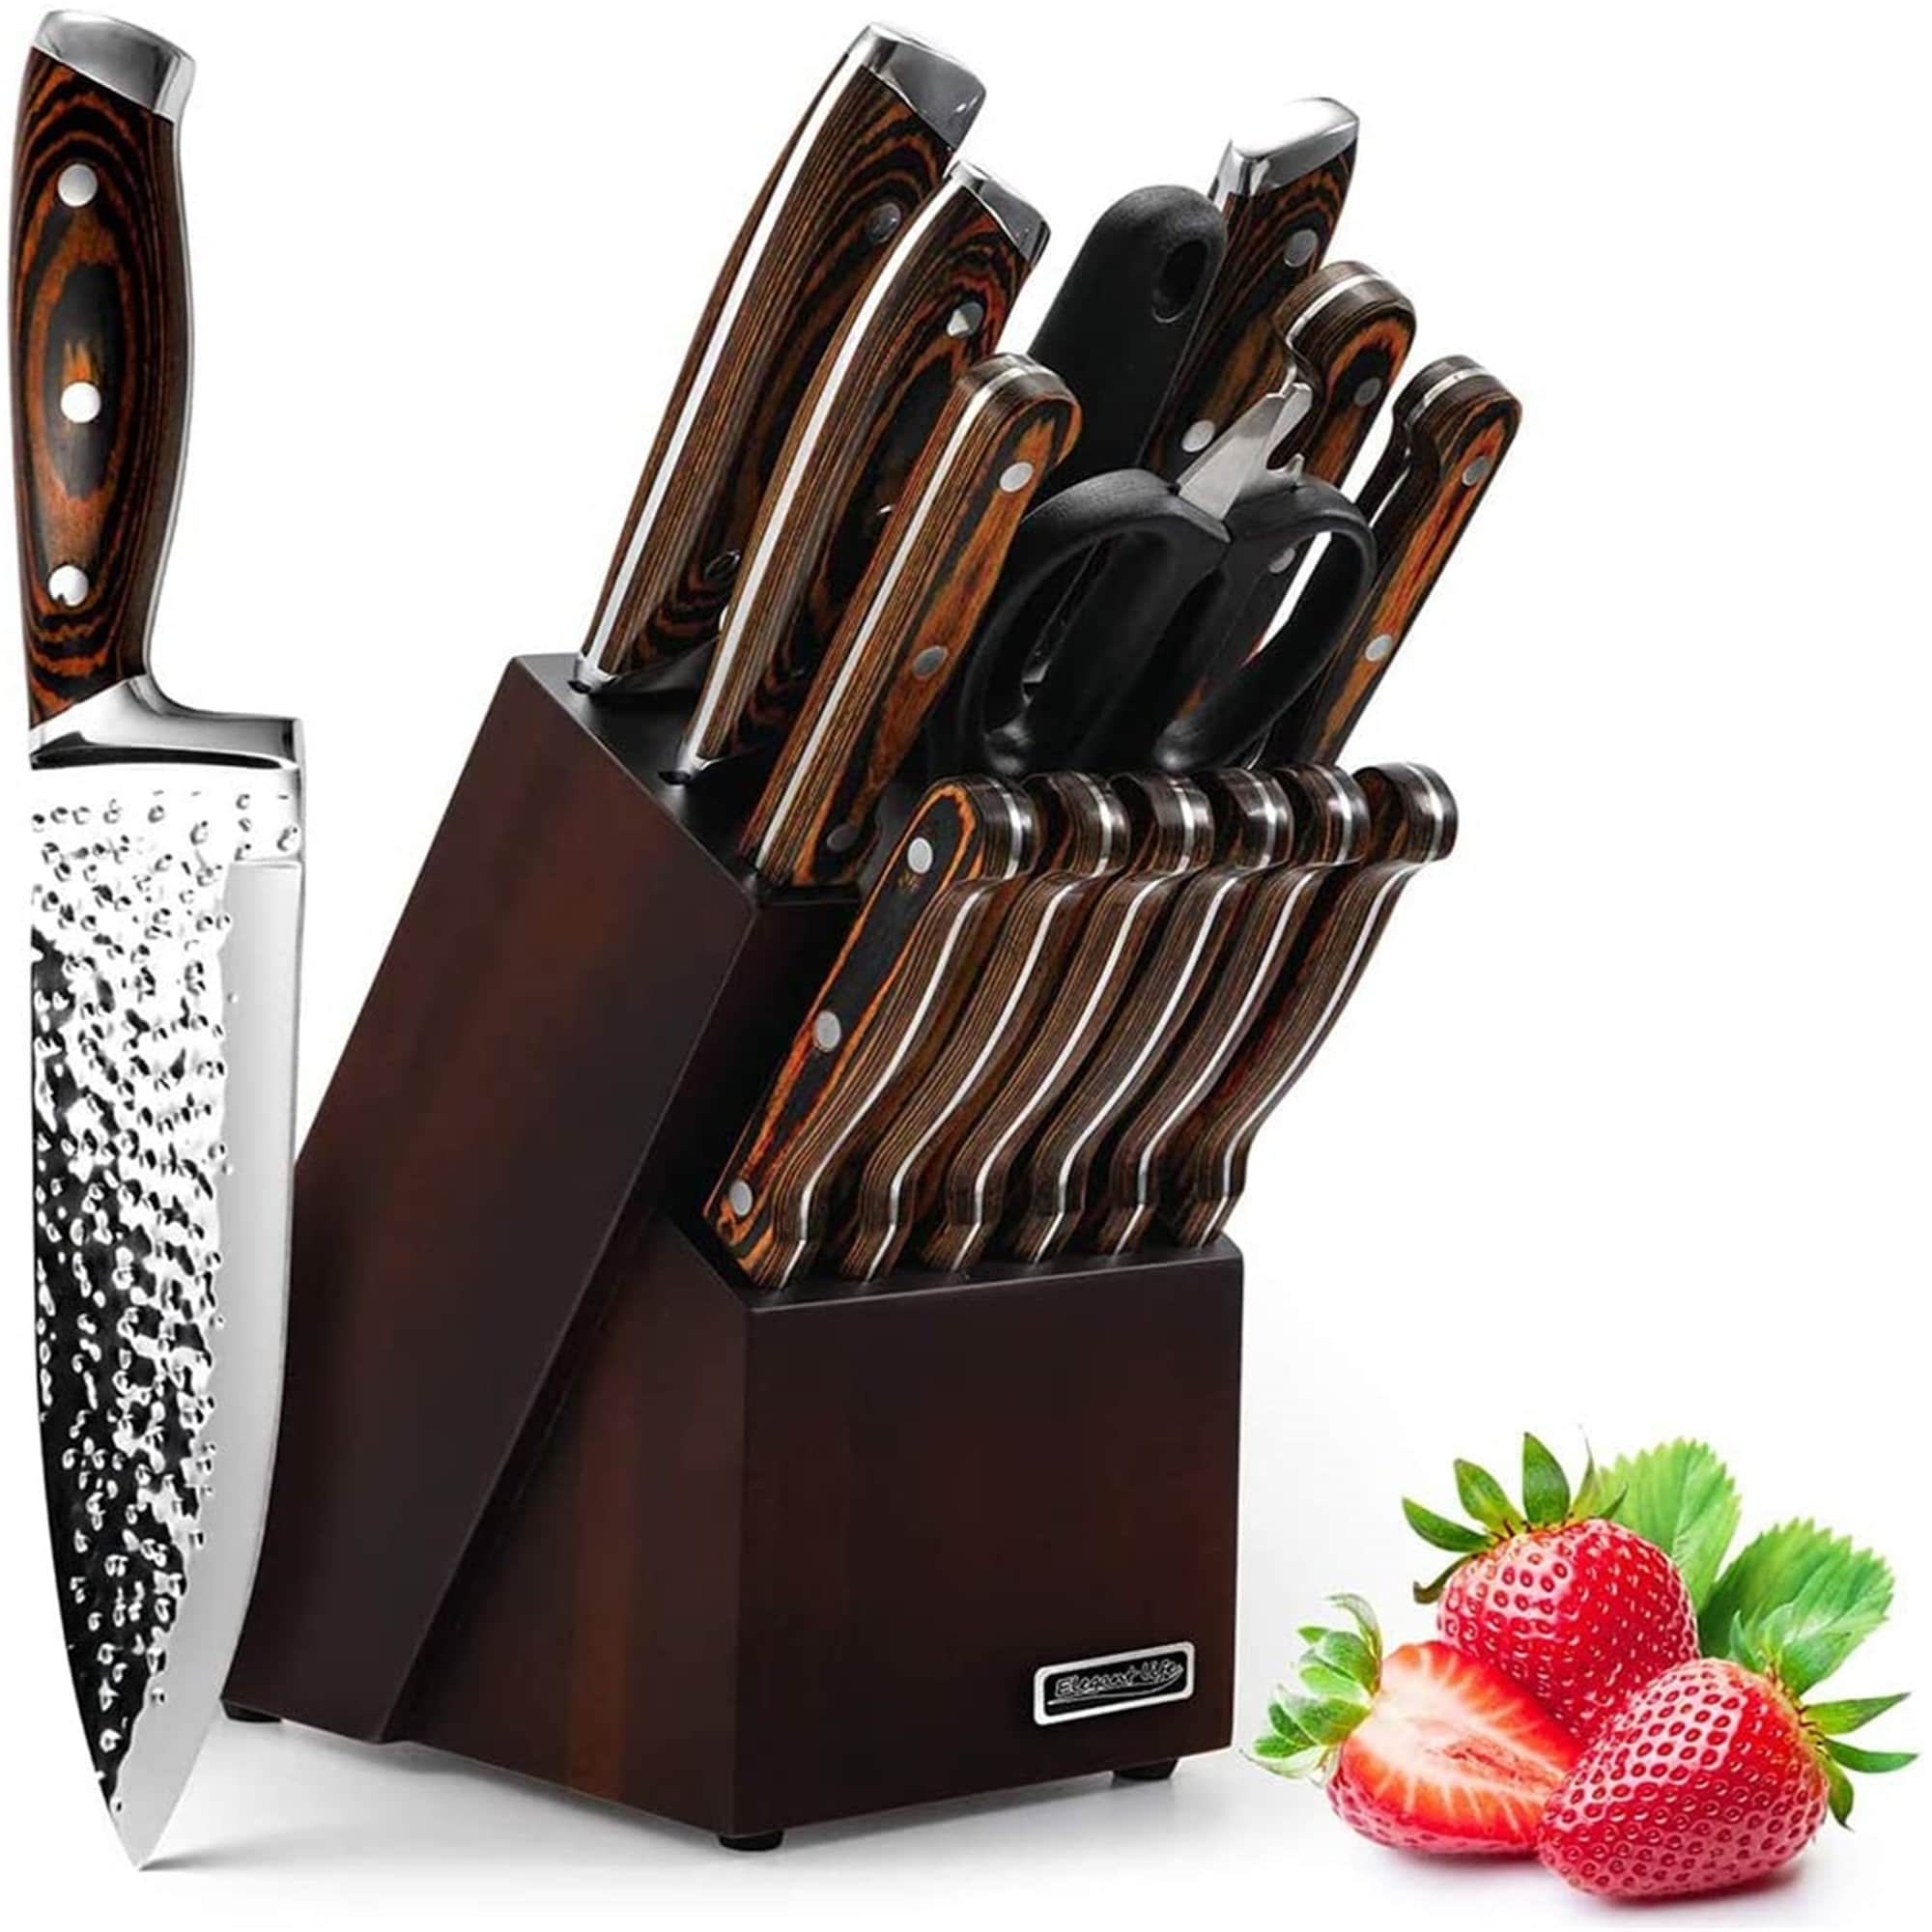 https://ak1.ostkcdn.com/images/products/is/images/direct/8207f4c611b8323ada53e5113e3985d1b1fa5e1e/Knife-Set%2C-Elegant-Life-15-Piece-Kitchen-Knife-Set-with-Block-Wooden%2C-Manual-Sharpening-for-Chef-Knife-Set%2C-Self-Sharpening.jpg